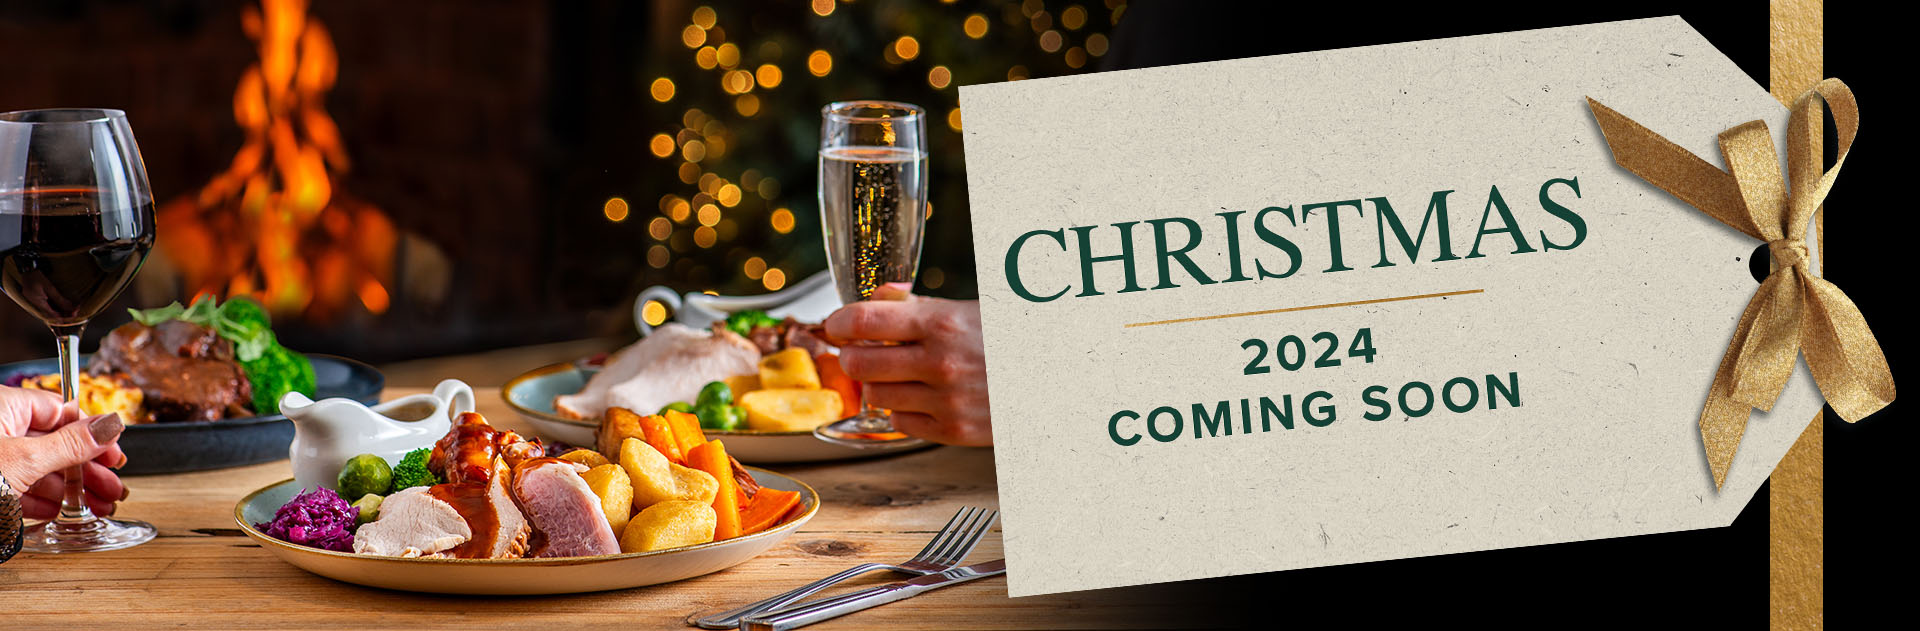 Christmas at The Old Hare and Hounds 